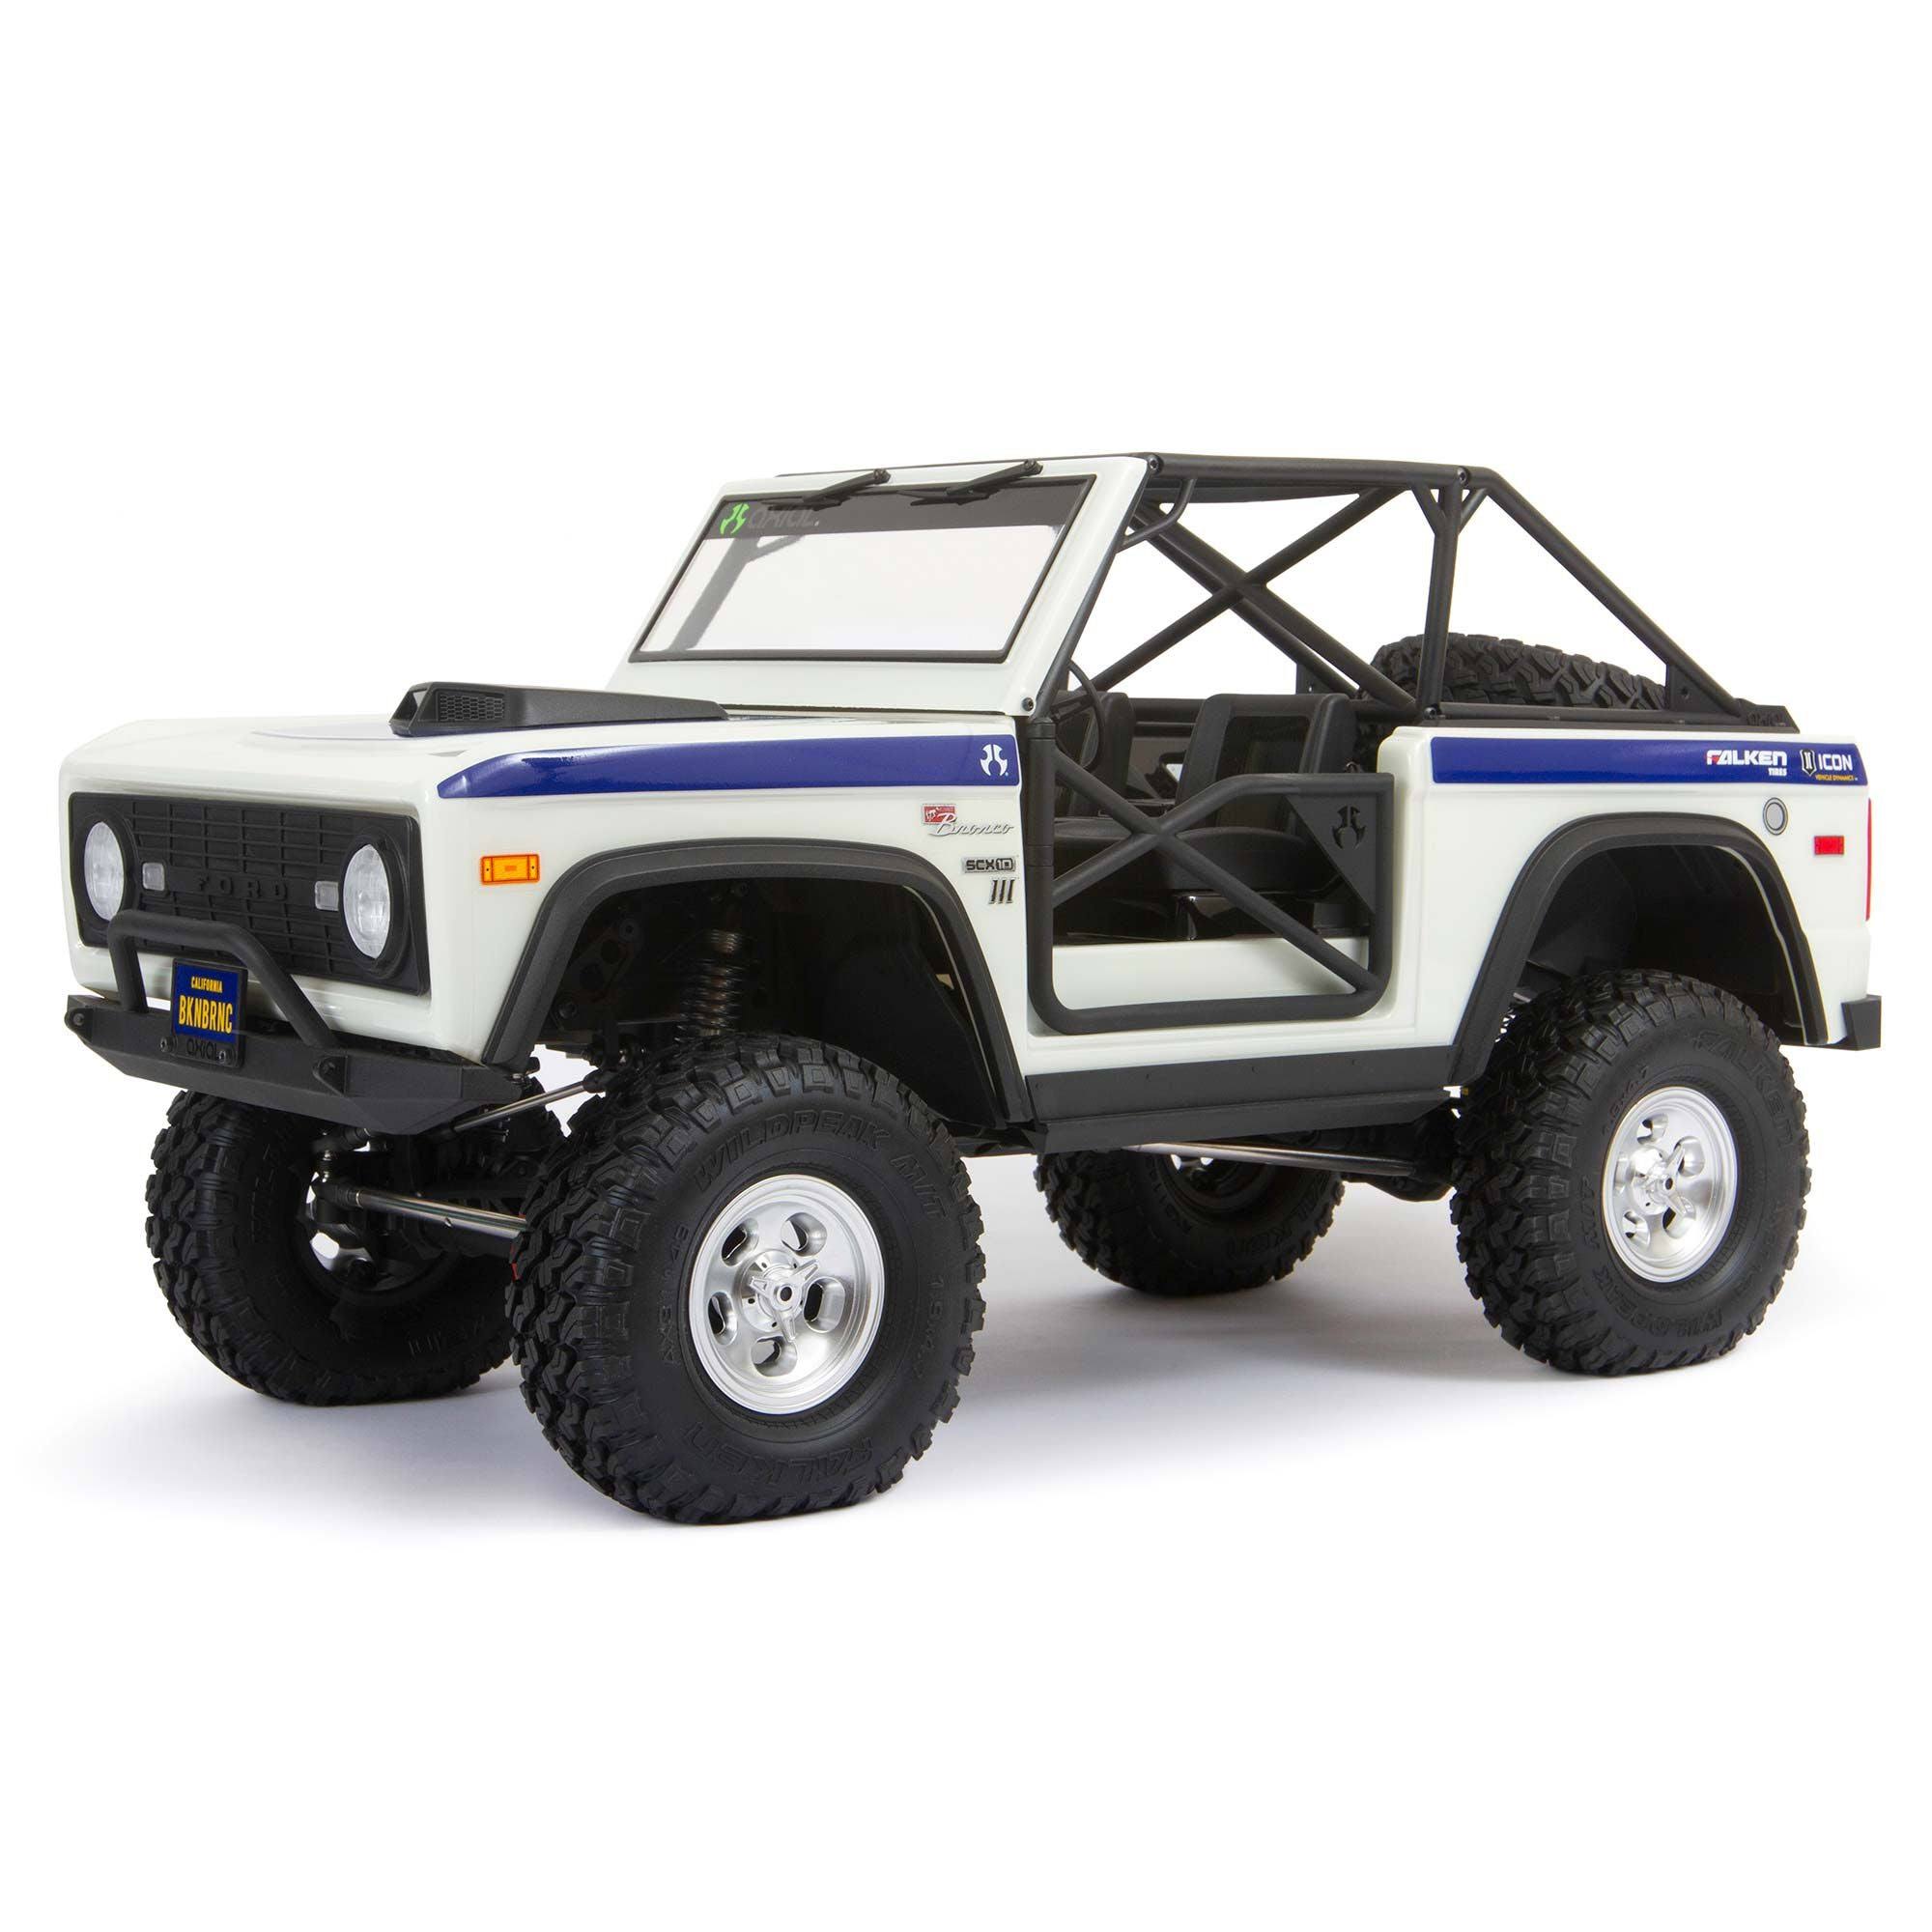 Axial 1/10 4WD Rock Crawler RTR Brushed SCX10 III Early Ford Bronco - White AXI03014T2